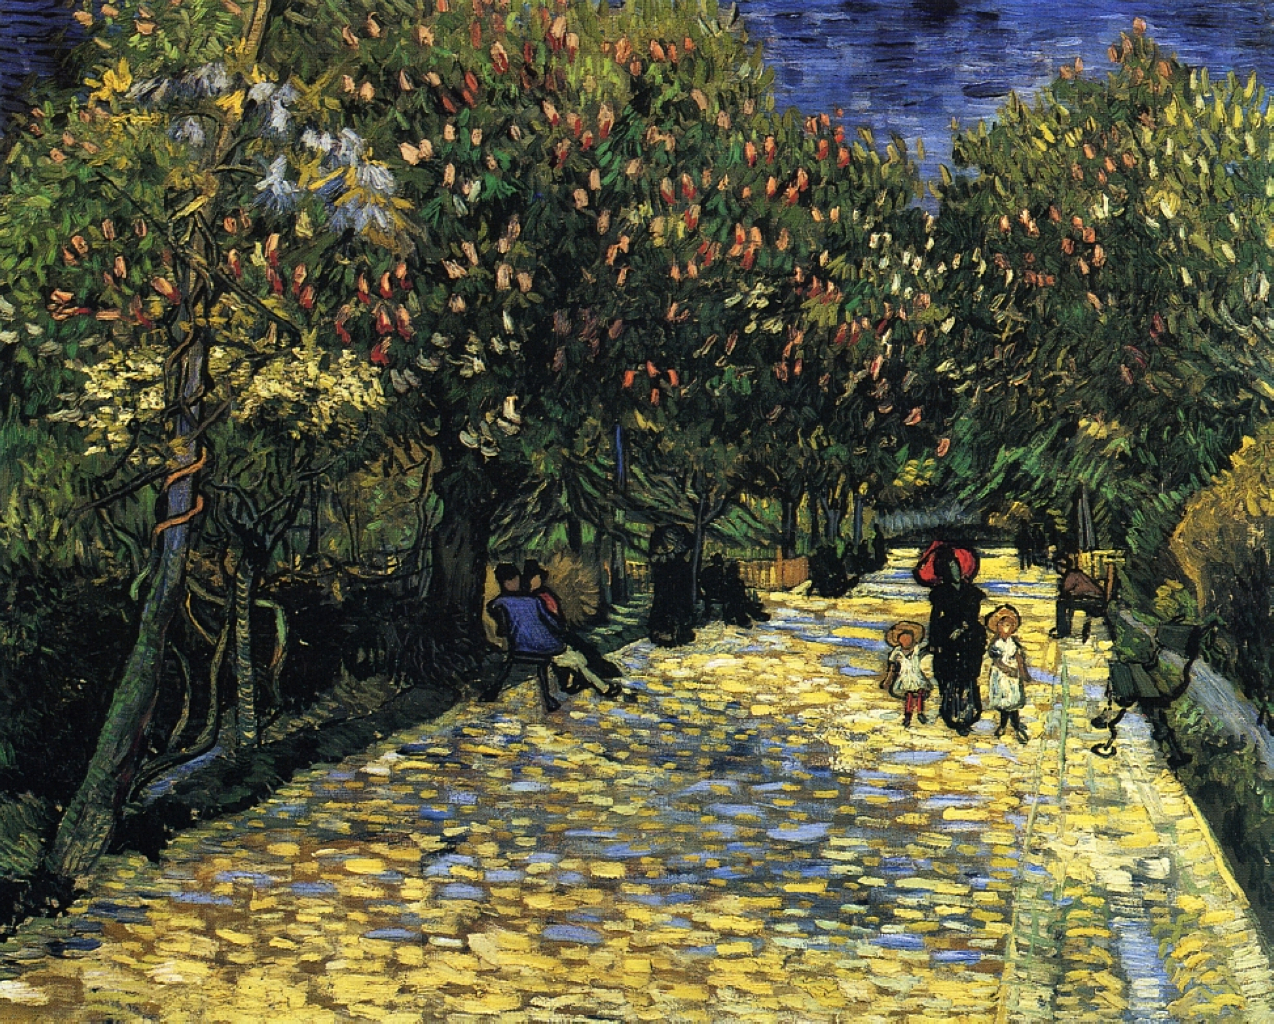 Red Chestnuts in the Public Park at Arles by Vincent van Gogh - 1889 - 72.5 x 92.0 cm private collection